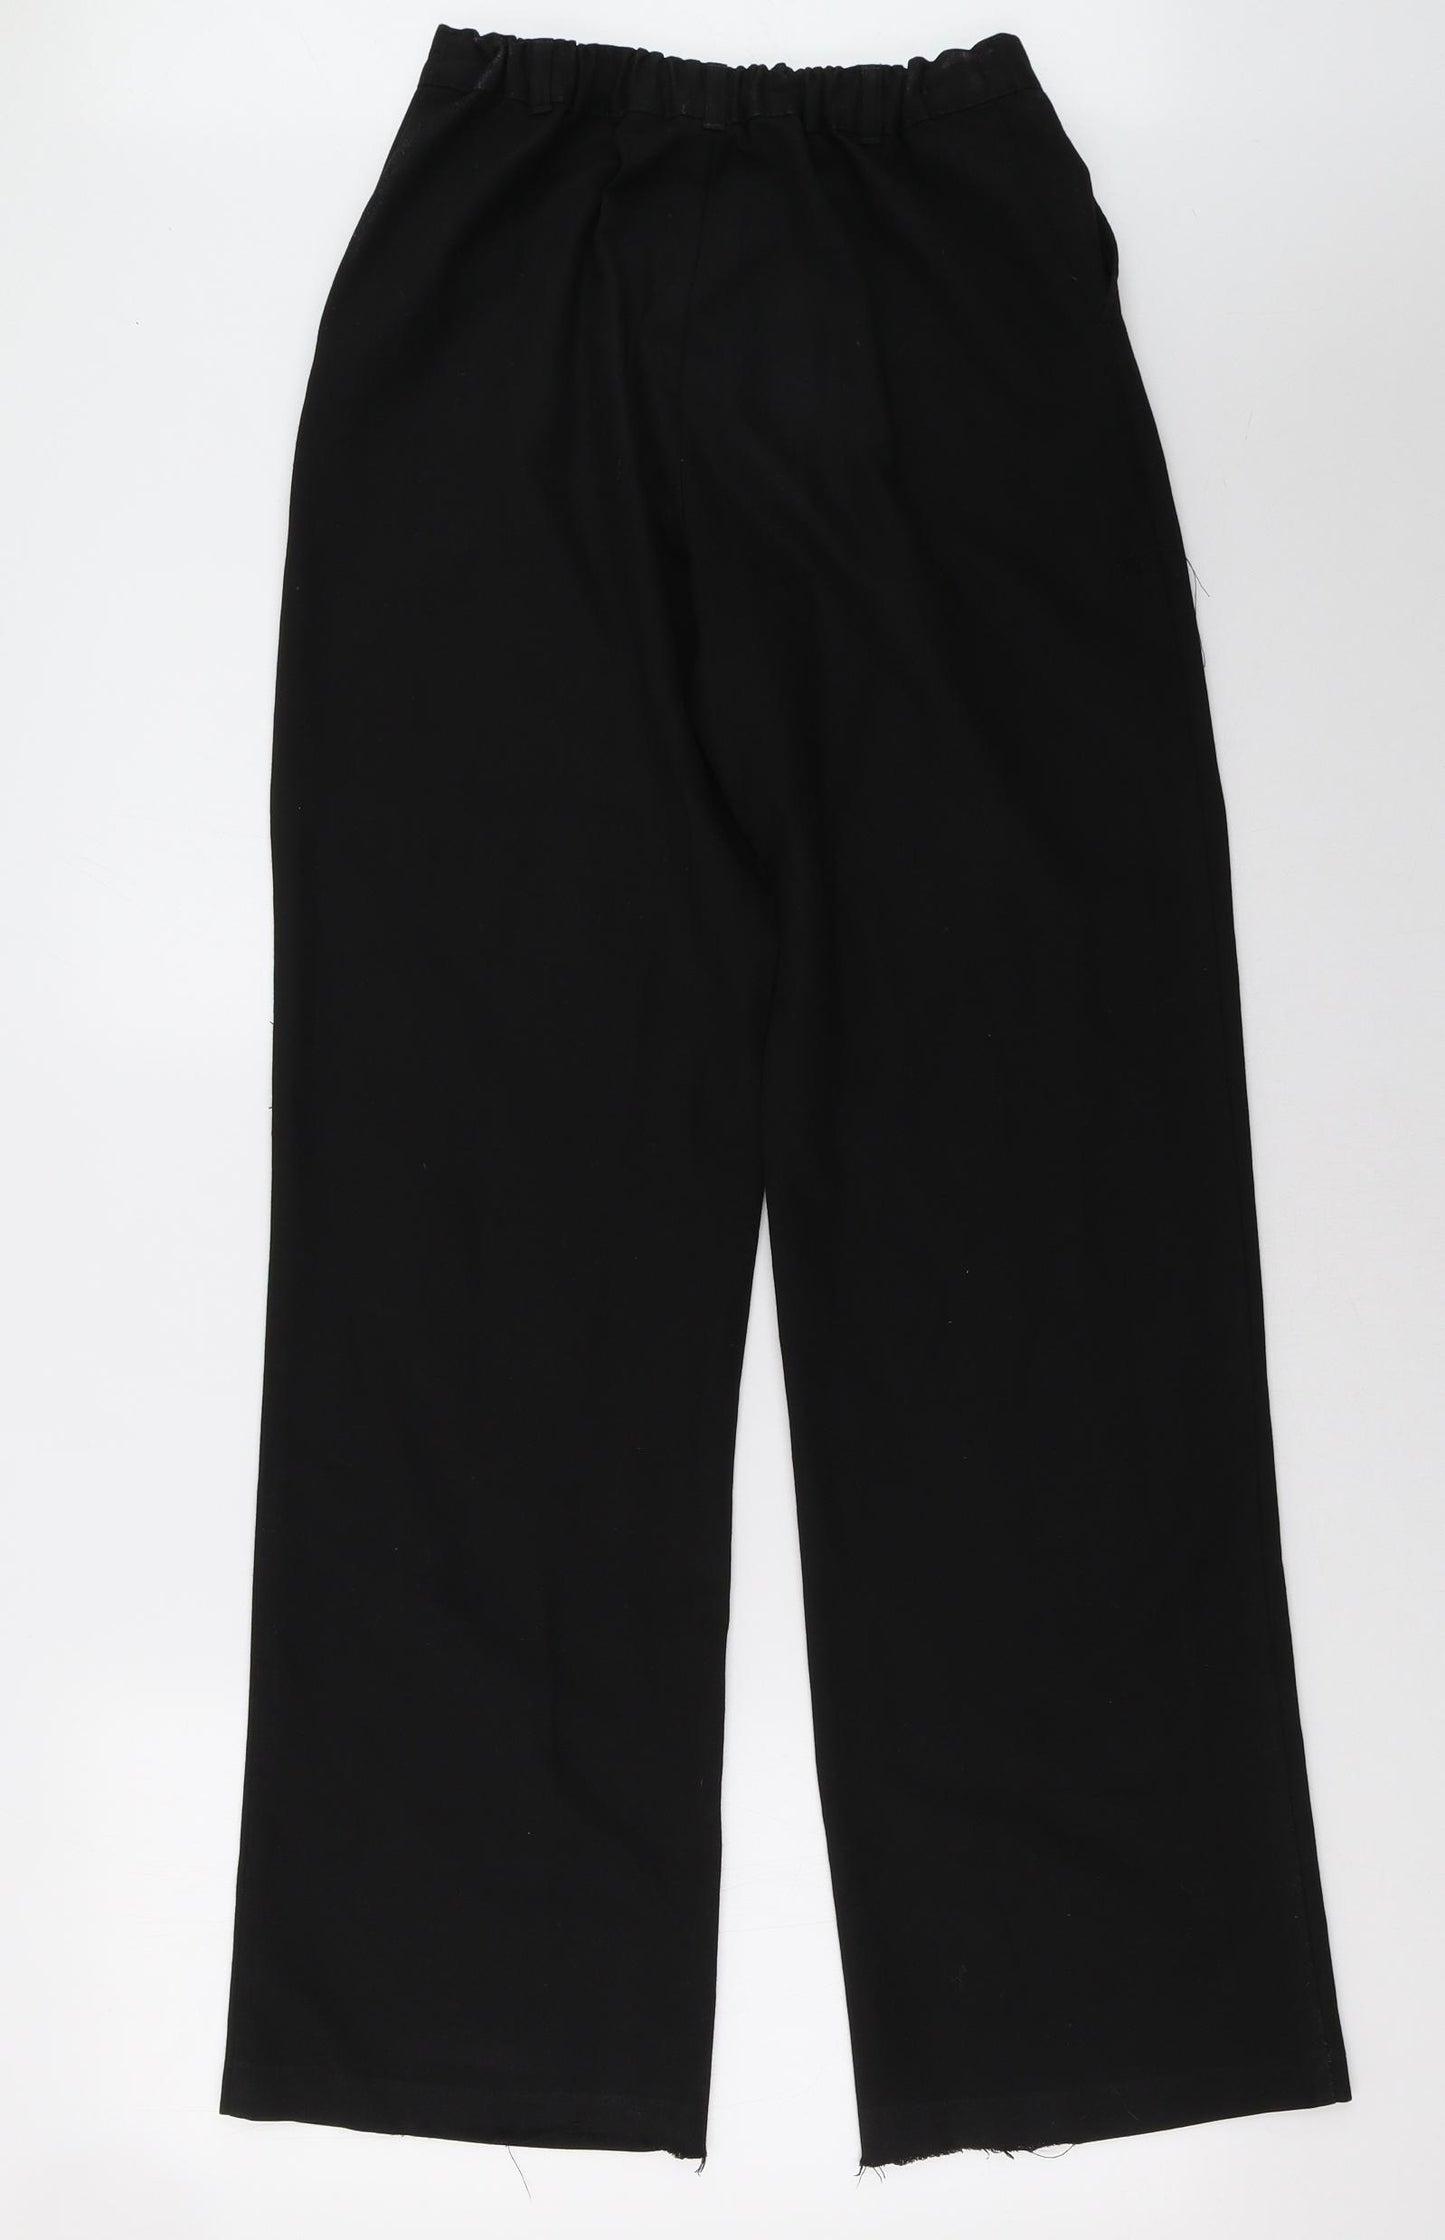 George Boys Black    Trousers Size 16 Years